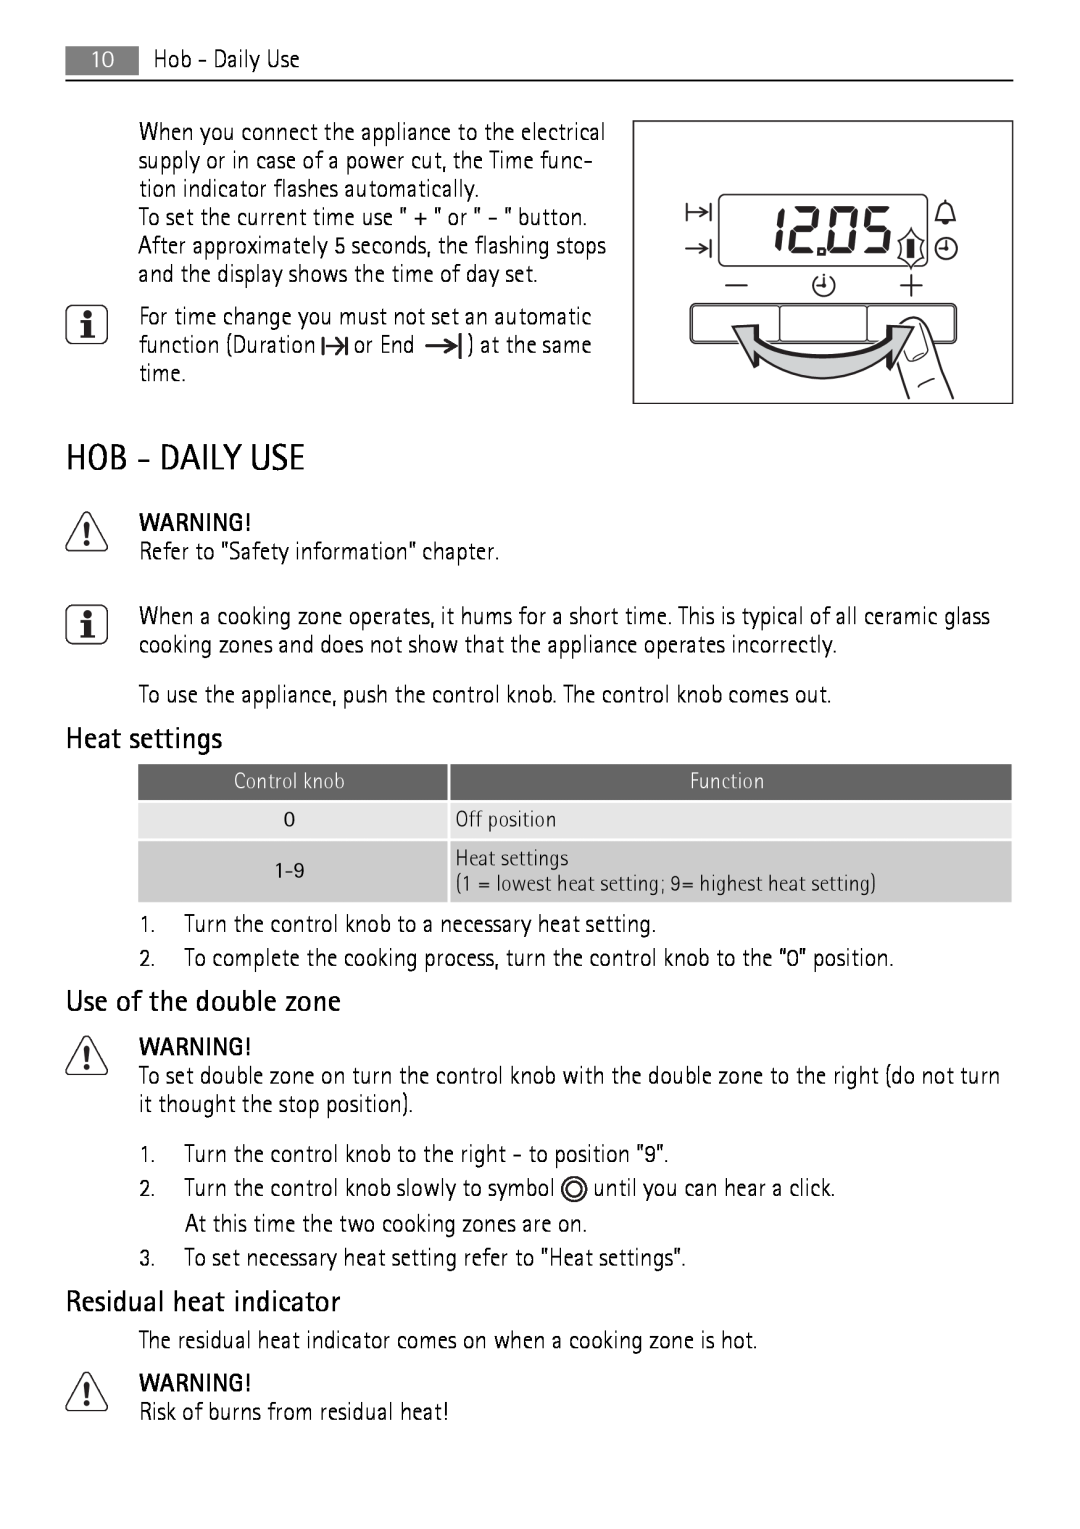 AEG 41056VH-MN user manual Hob - Daily Use, Heat settings, Use of the double zone, Residual heat indicator 